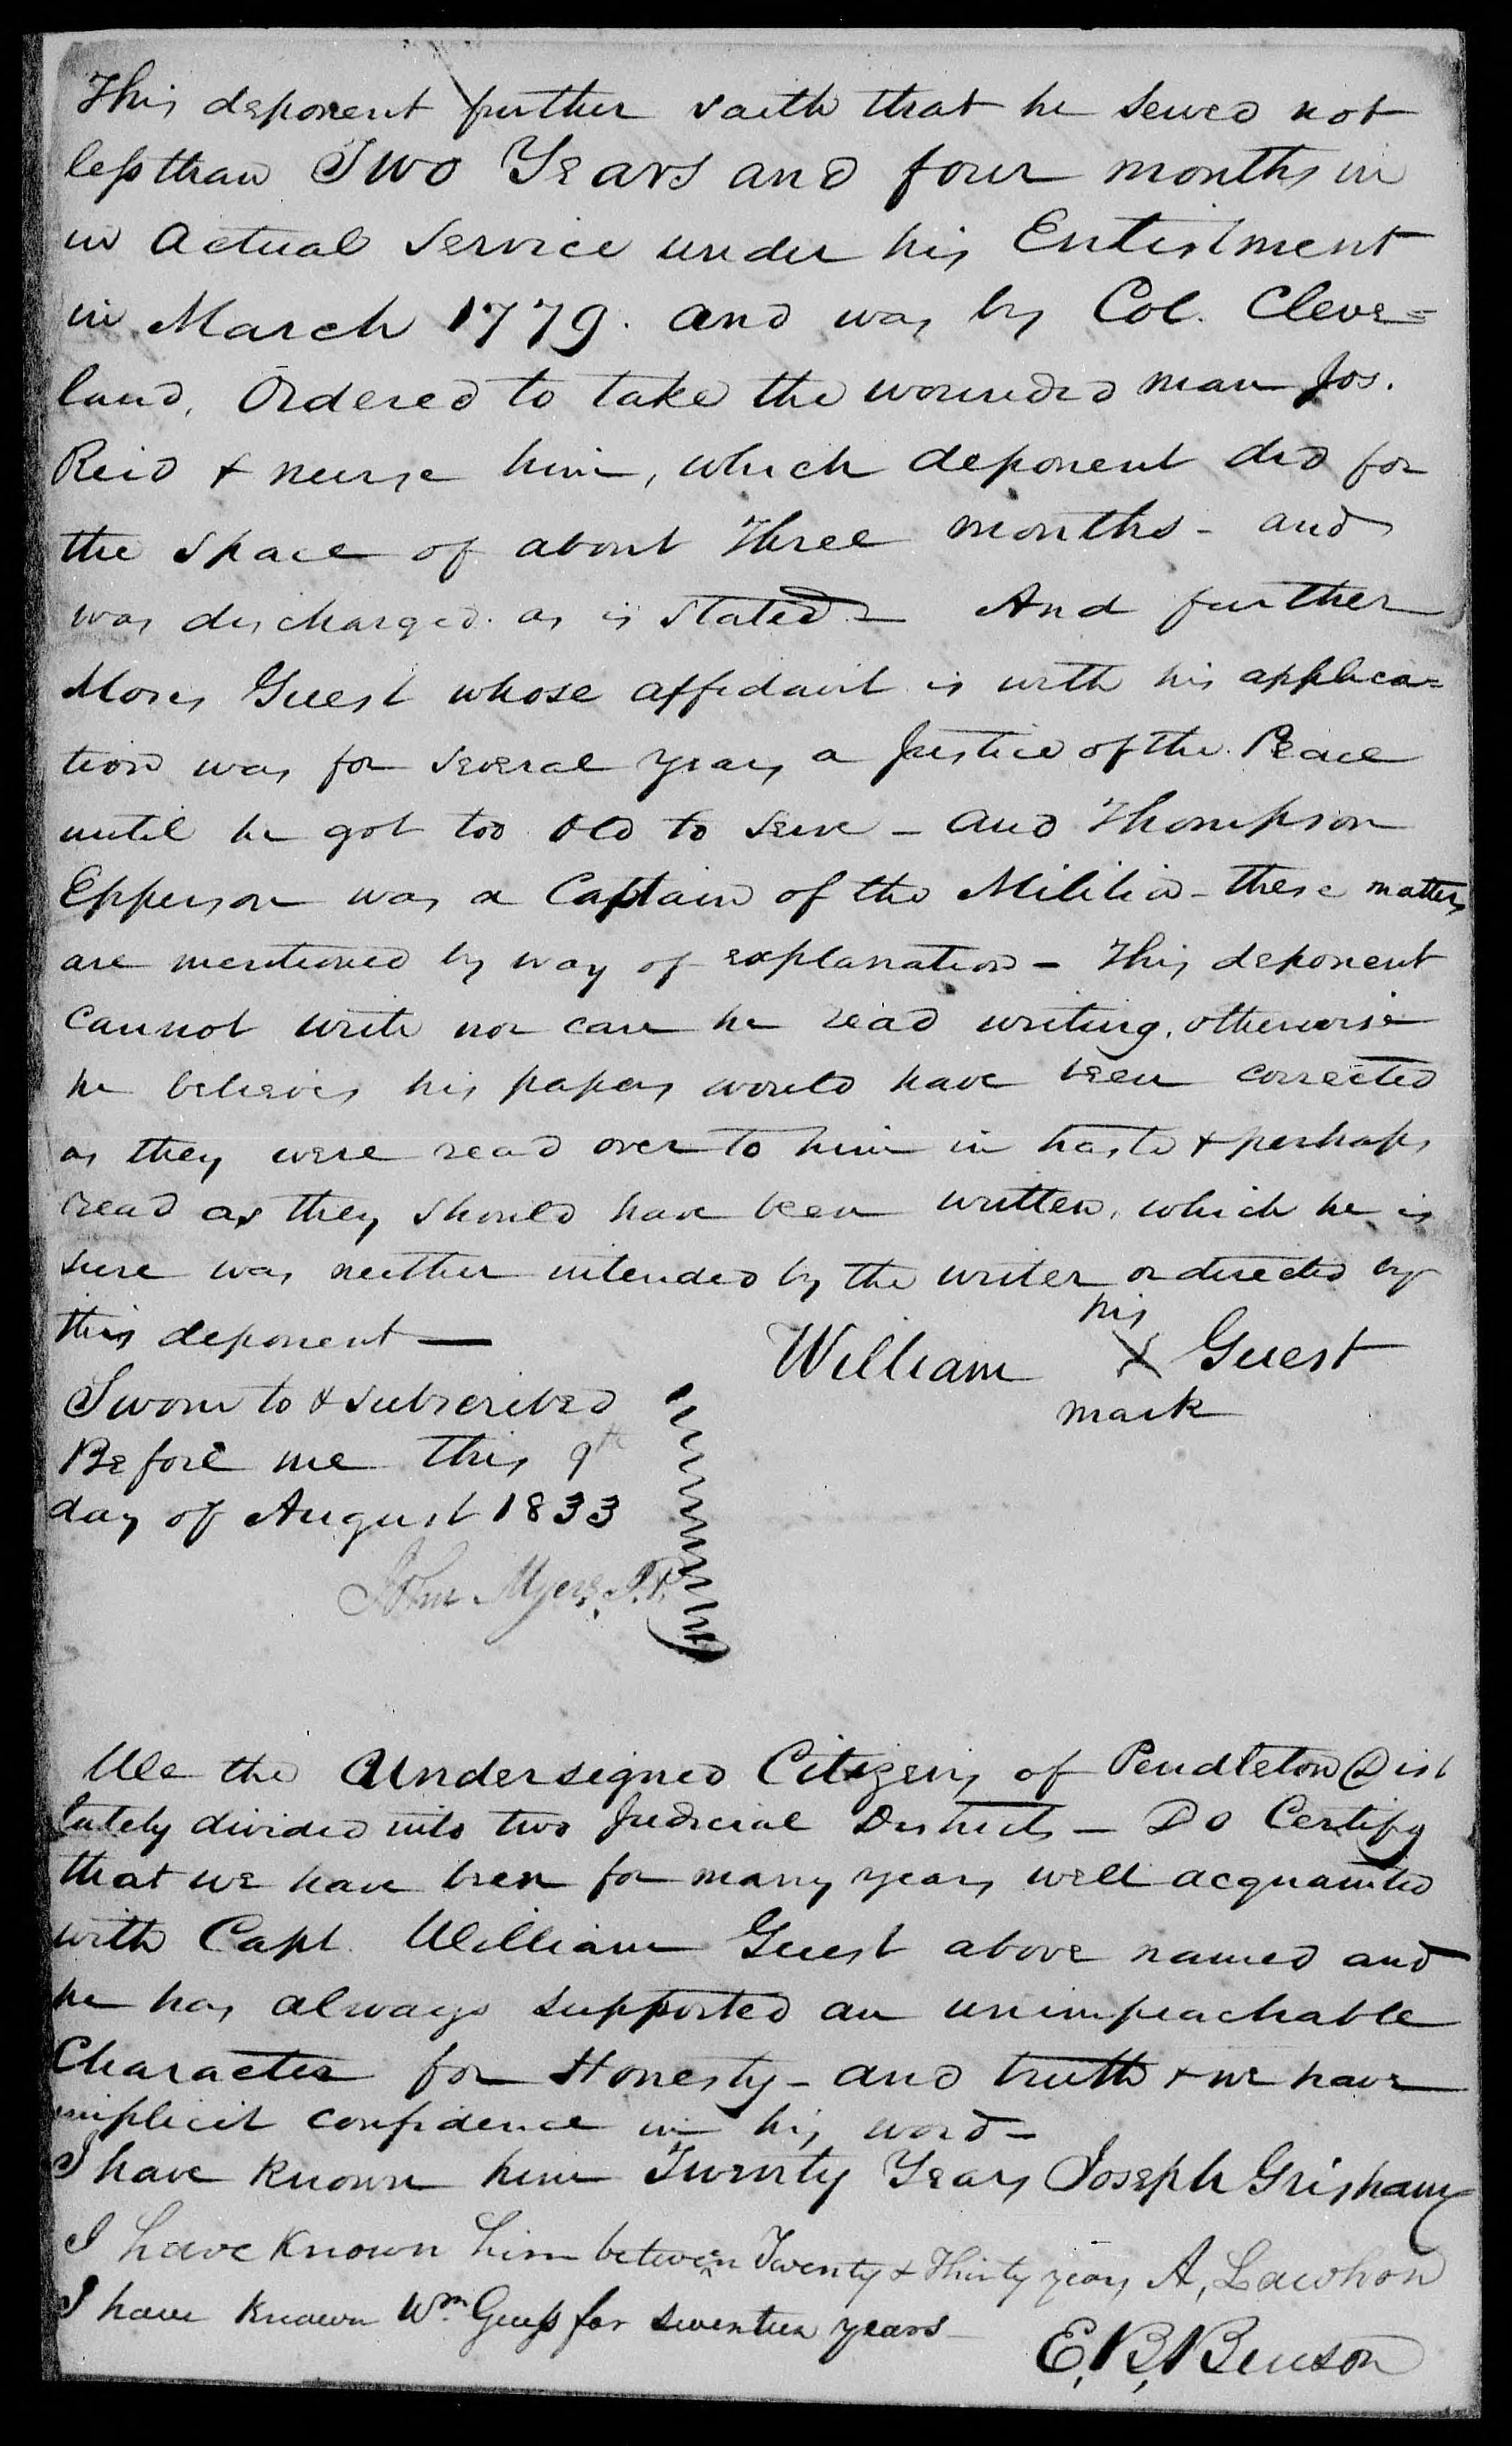 Application for a Veteran's Pension from William Guest, 9 August 1833, page 2